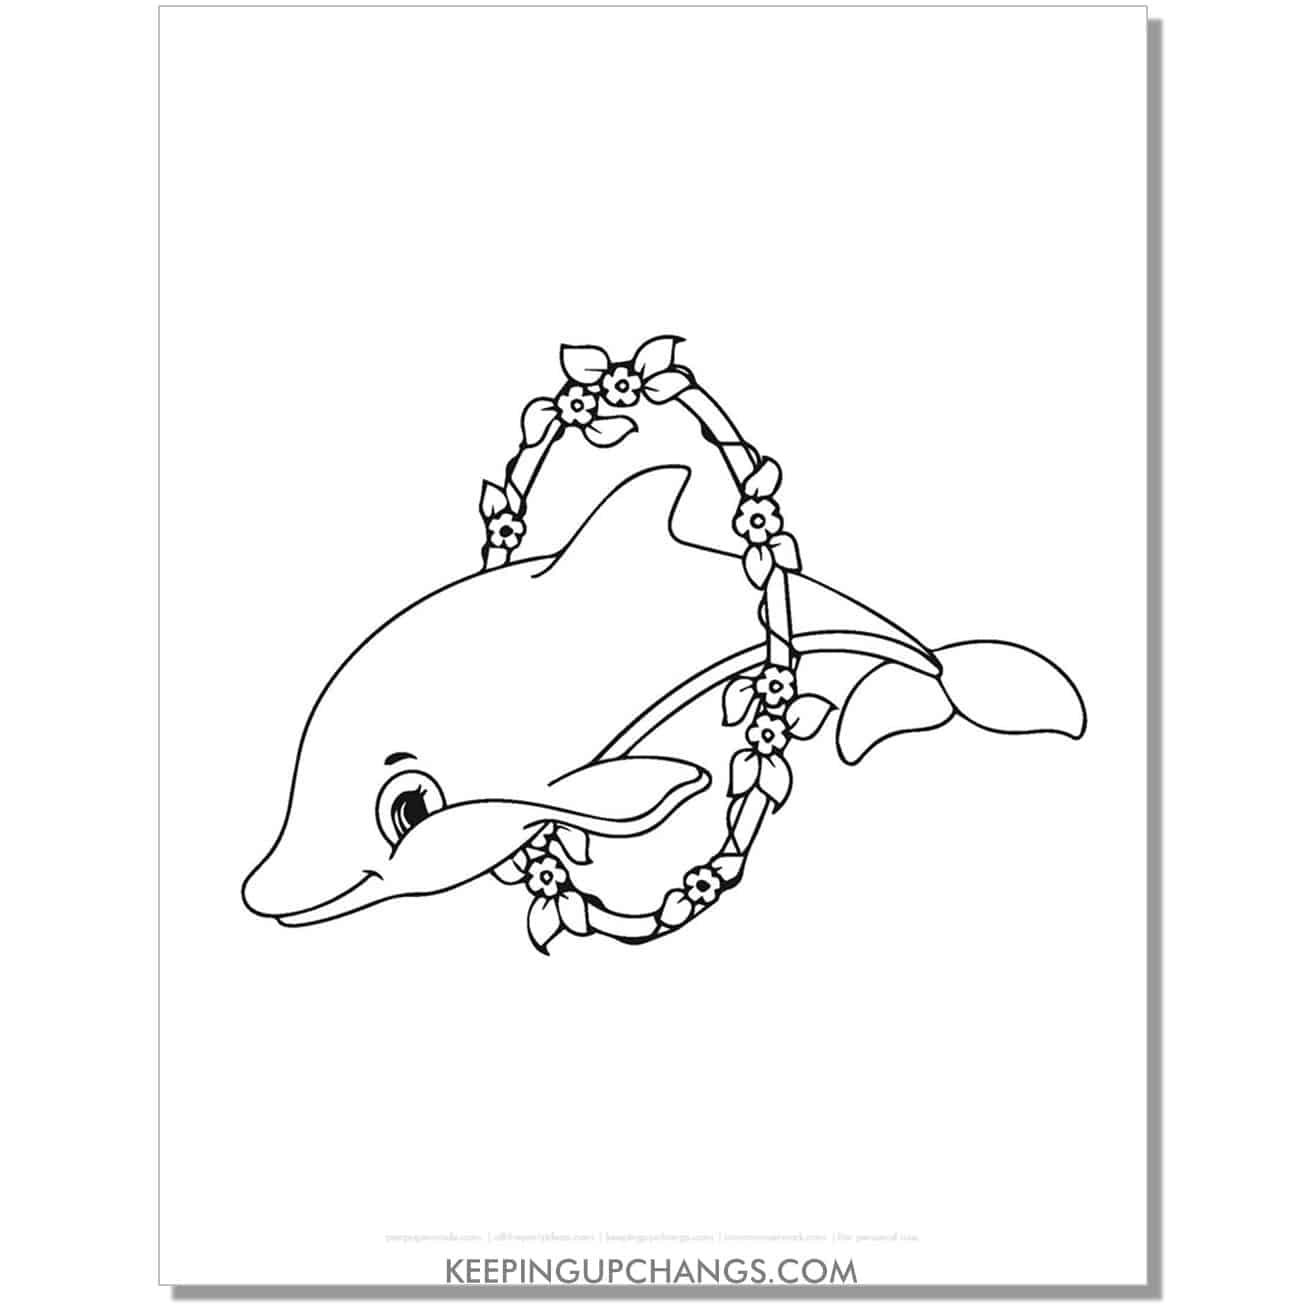 free dolphin jumping through hoop of flowers coloring page, sheet.